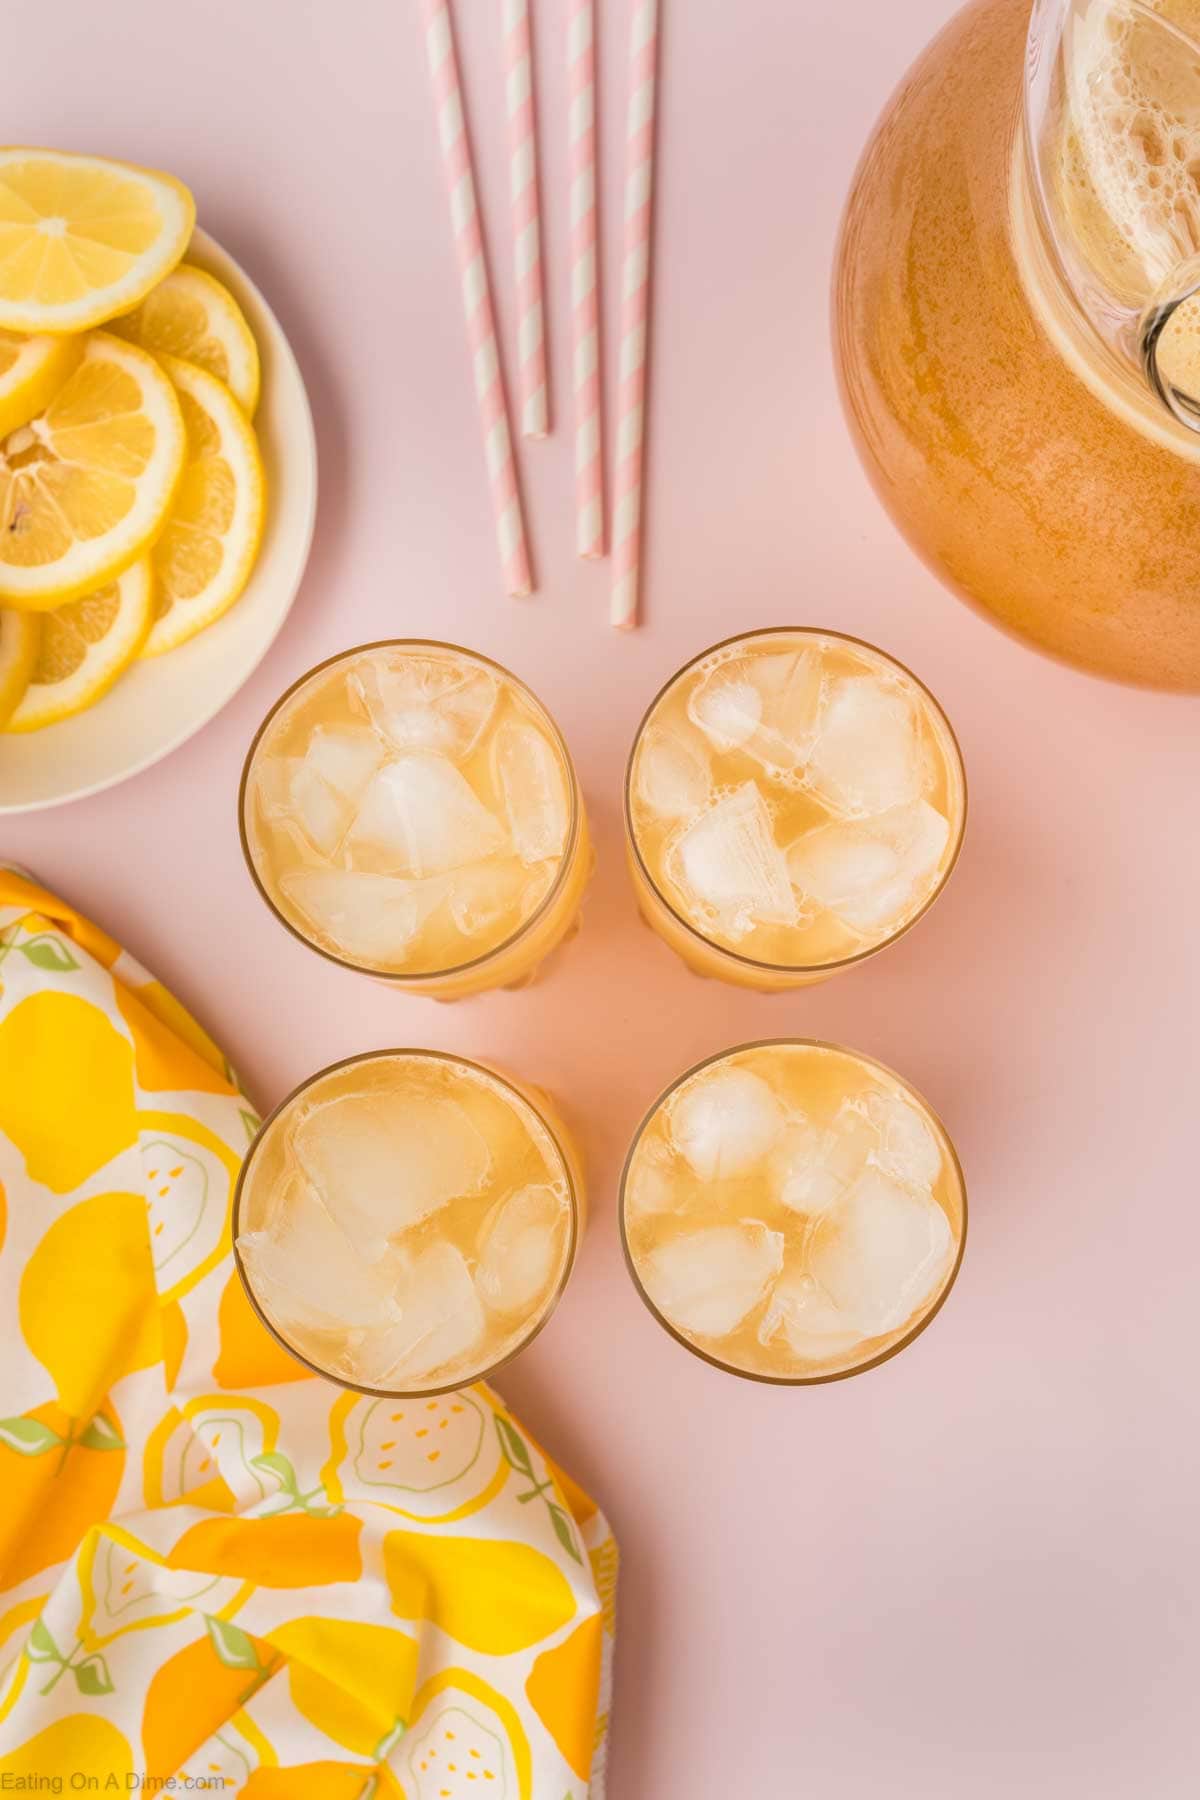 Glasses of lemonade with ice and a plate of lemon slices